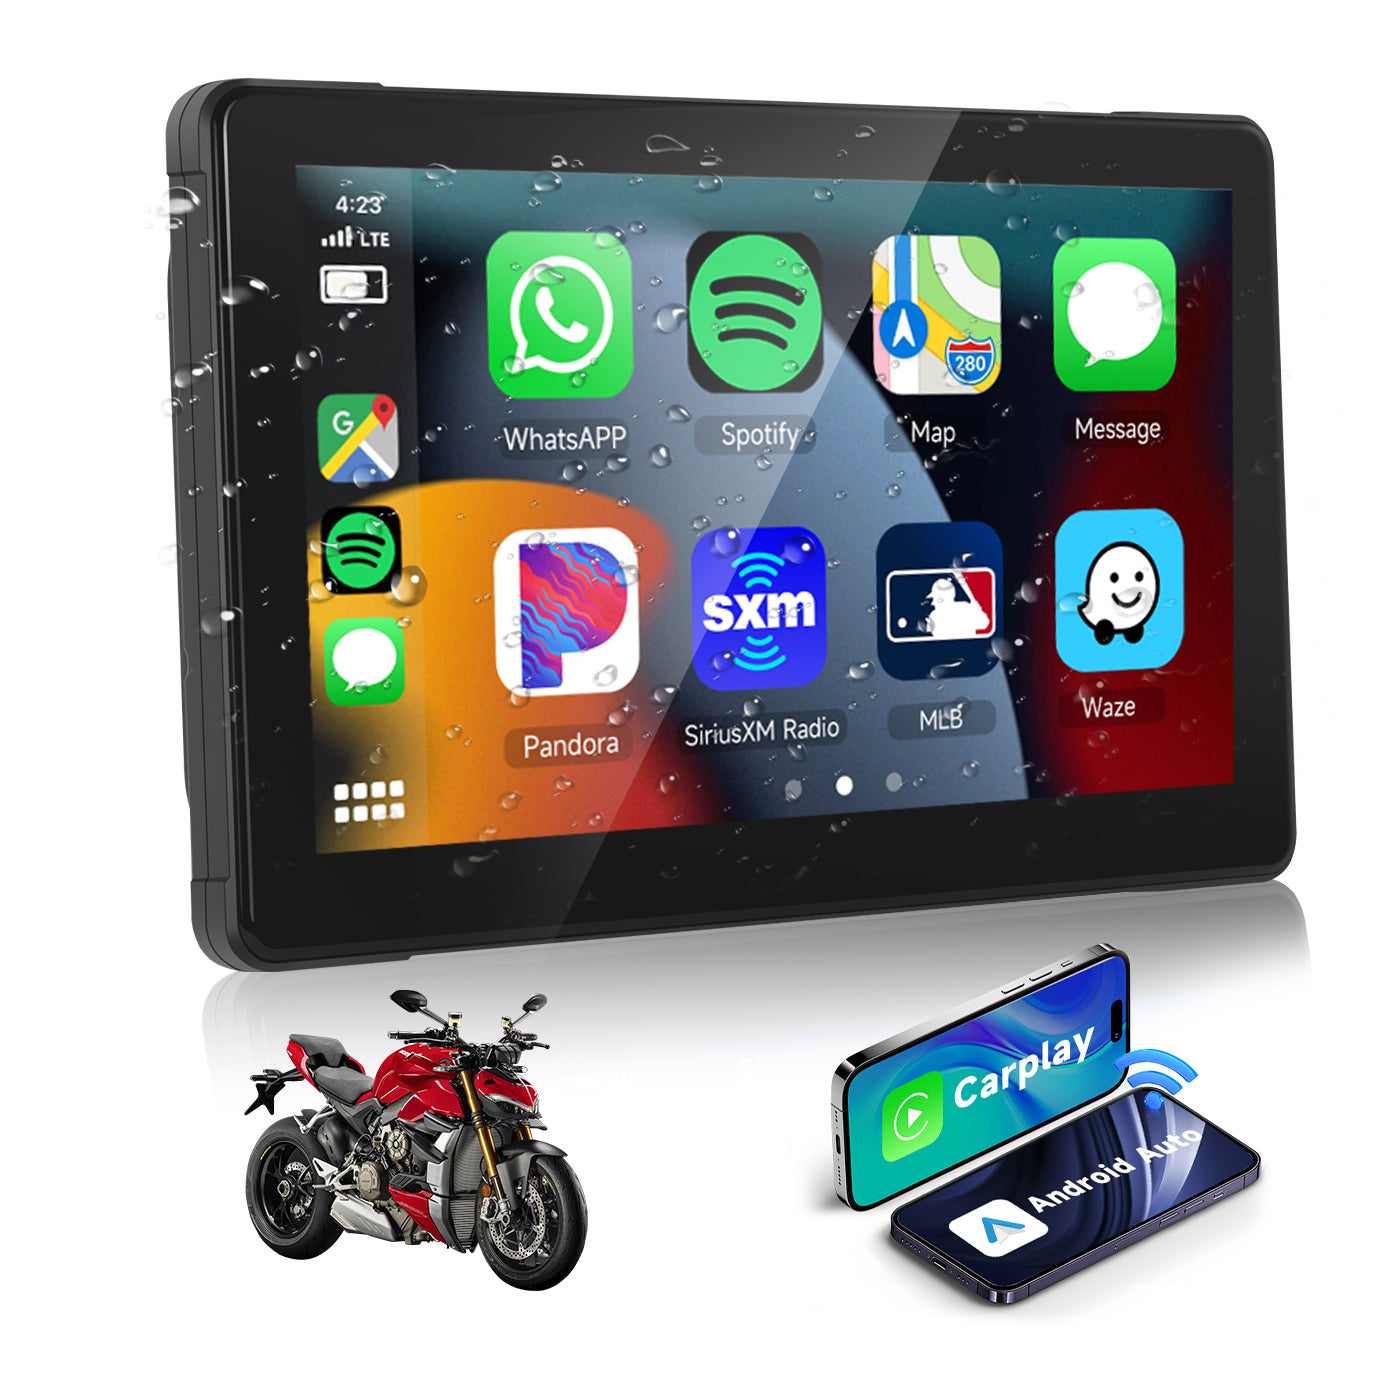 Zmecar 7" Motorcycle GPS system Wireless Carplay Android Auto Screen IP67 Waterproof screen, Dual Bluetooth Connectivity, TF/Type-C